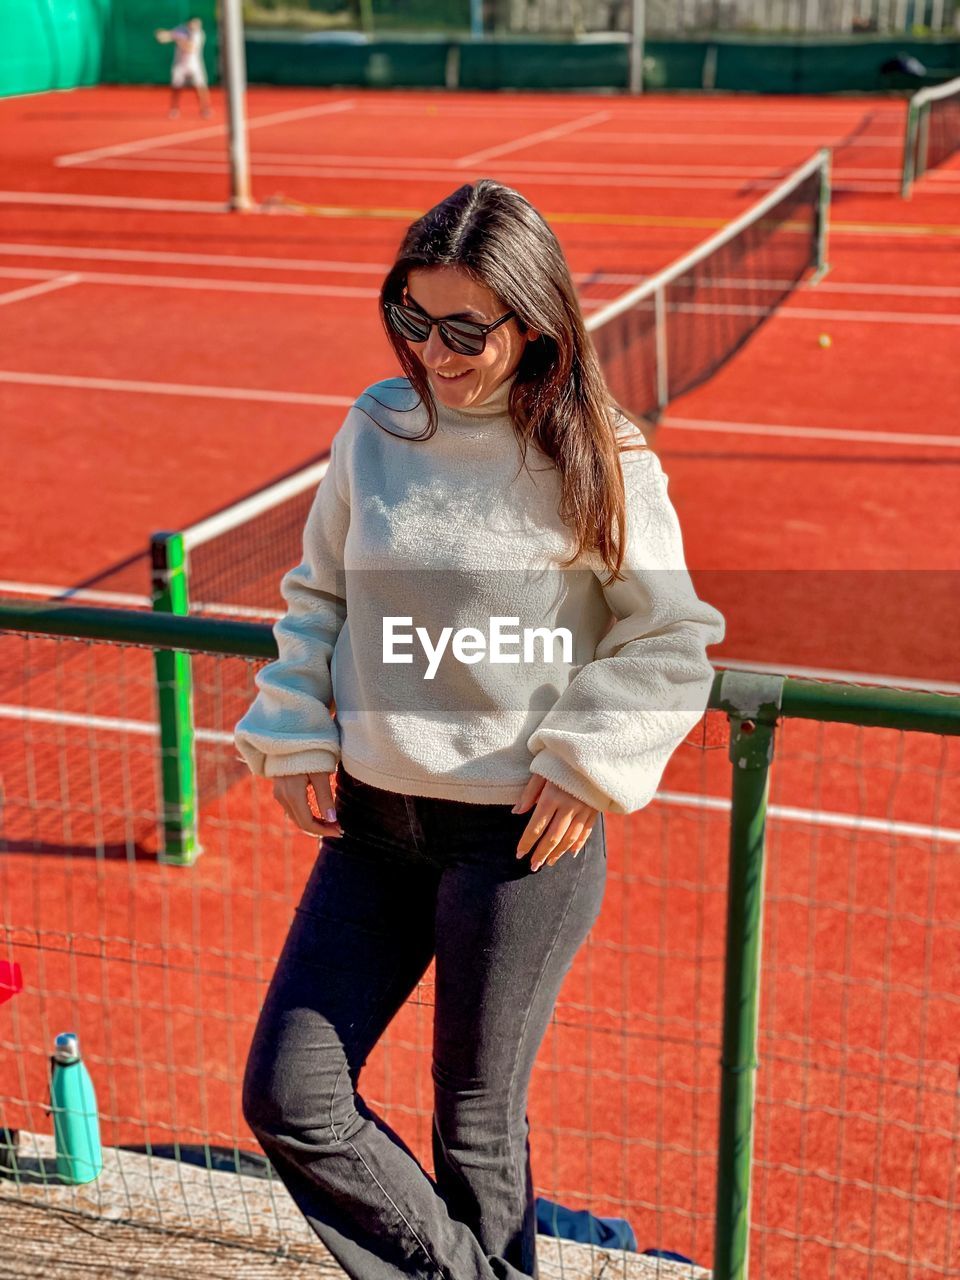 one person, young adult, glasses, adult, women, sports, lifestyles, full length, red, track and field event, front view, hairstyle, sunglasses, clothing, fashion, standing, day, jumping, casual clothing, long hair, portrait, smiling, footwear, sport venue, athlete, eyeglasses, happiness, emotion, leisure activity, looking at camera, outdoors, trousers, looking, sunlight, brown hair, female, person, running track